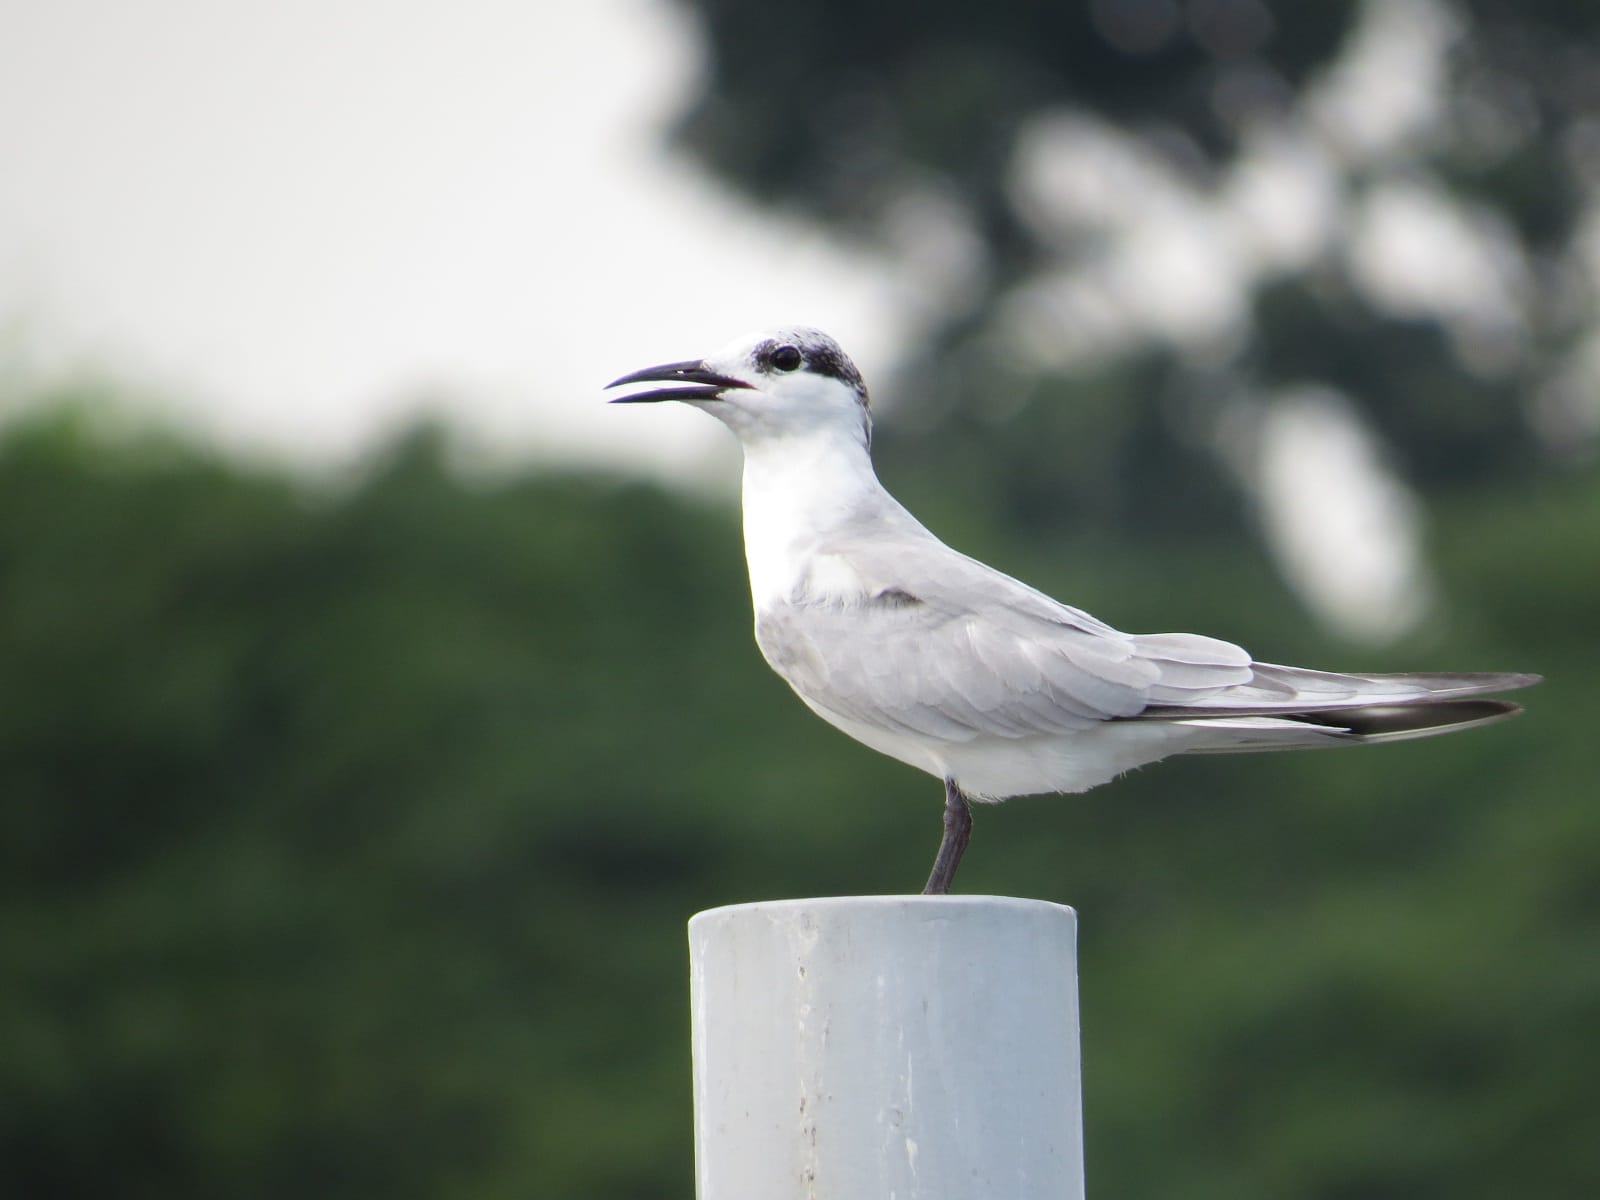 Whiskered Tern photographed with a Canon SX50. Photo by Jayce Japlit.